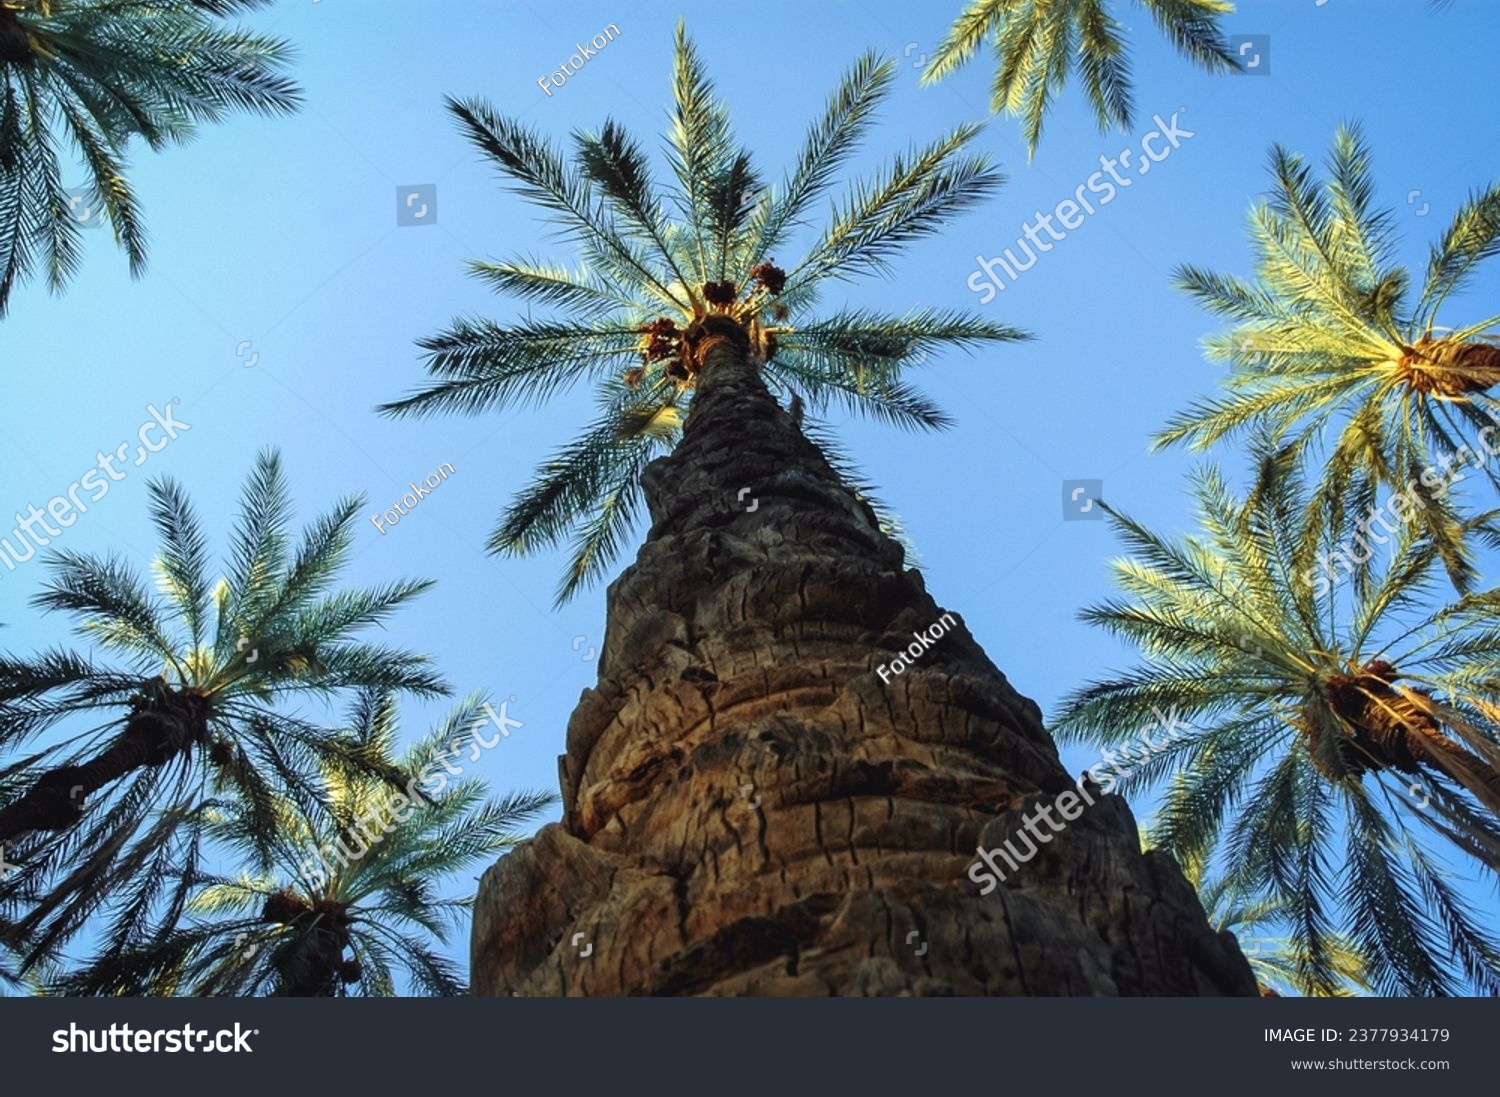 Palm on date palm plantation in Degache oasis town, Tozeur Governorate of Tunisia #2377934179